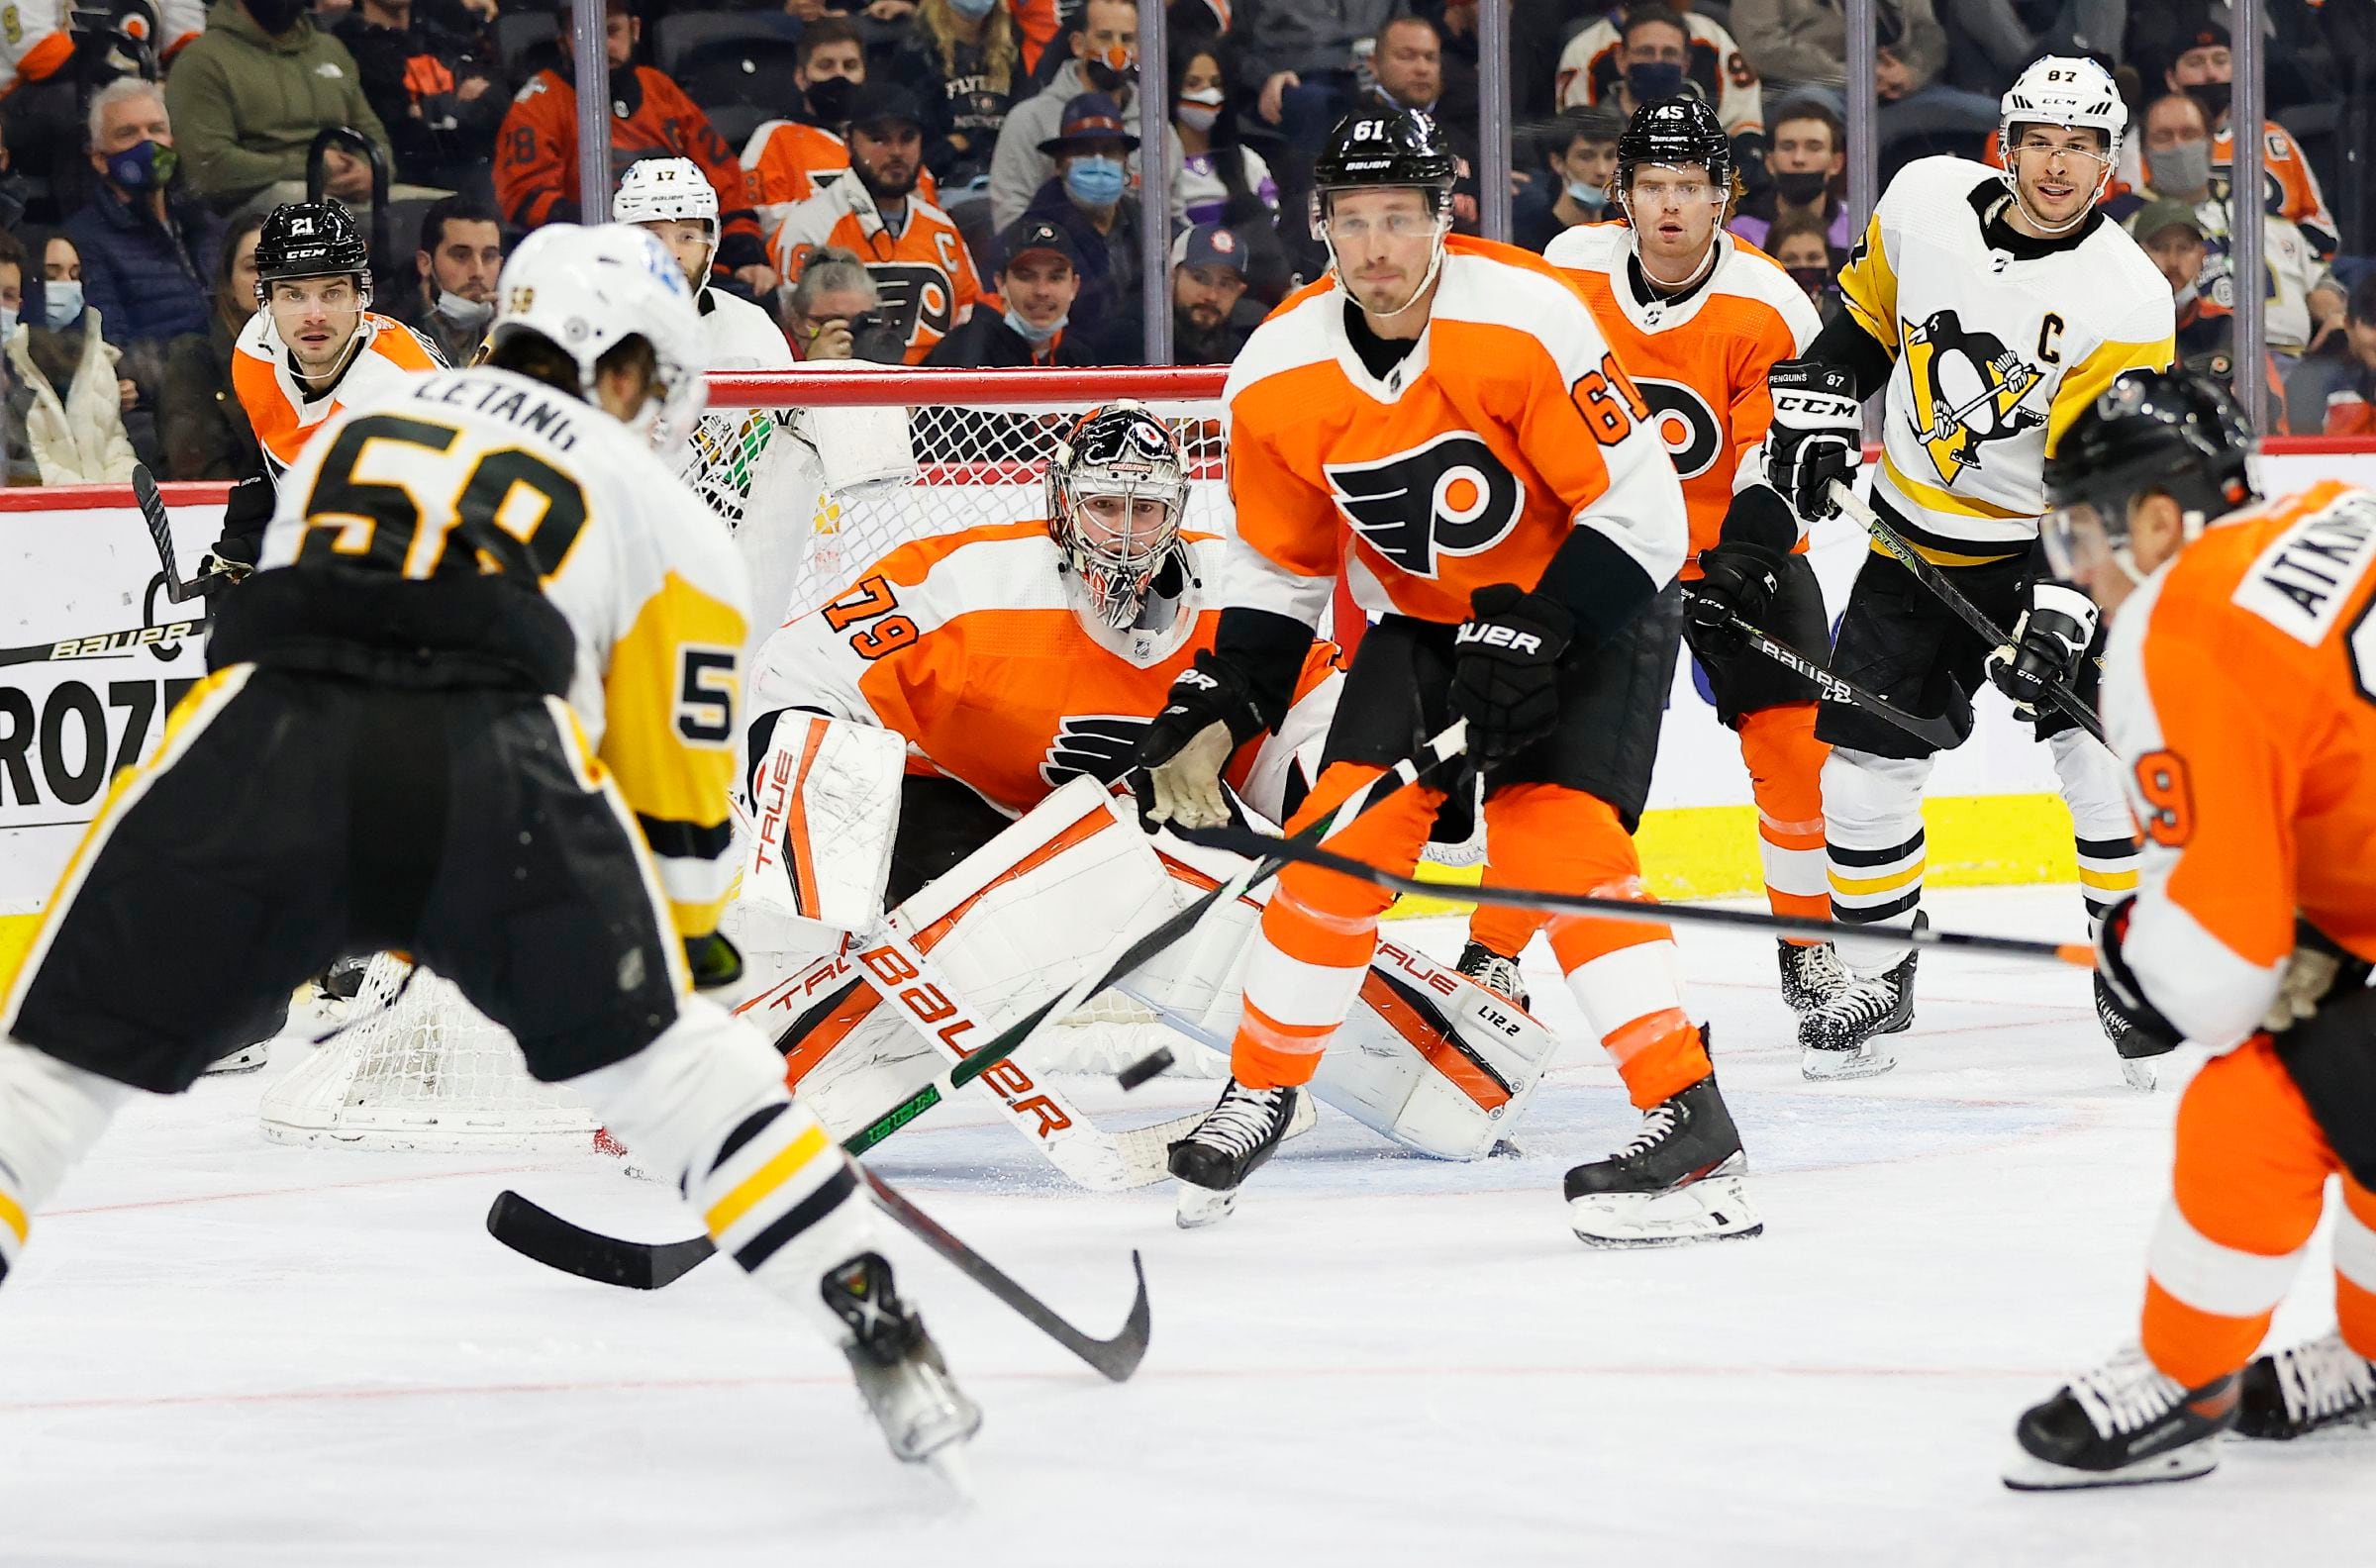 Flyers-Penguins Preview: Oh Danny Boy